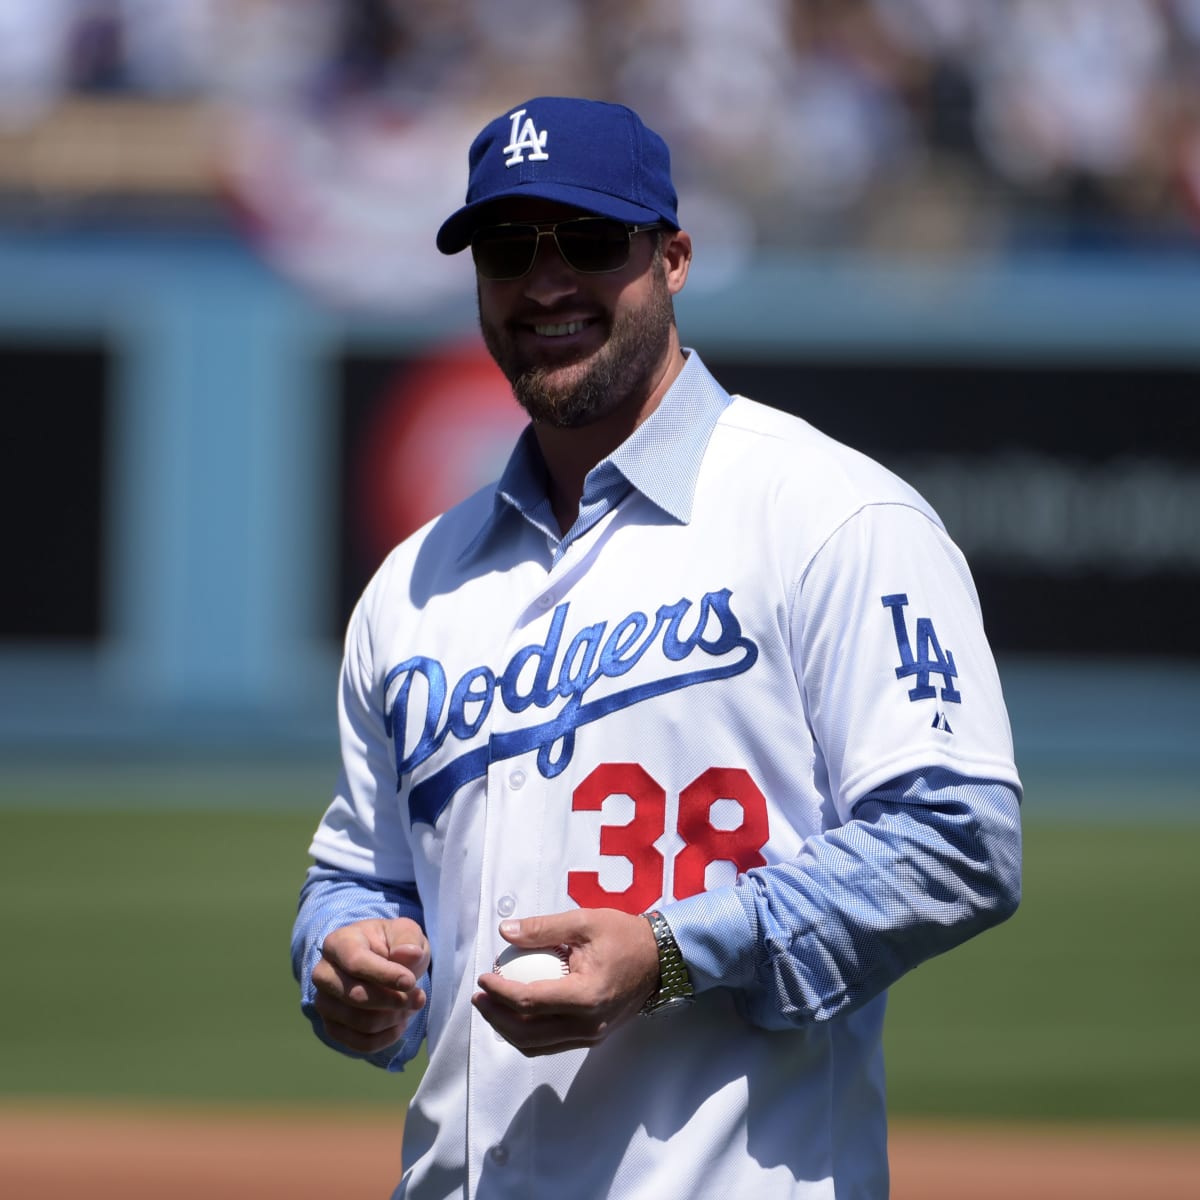 MLB The Show 21 - Eric Gagne